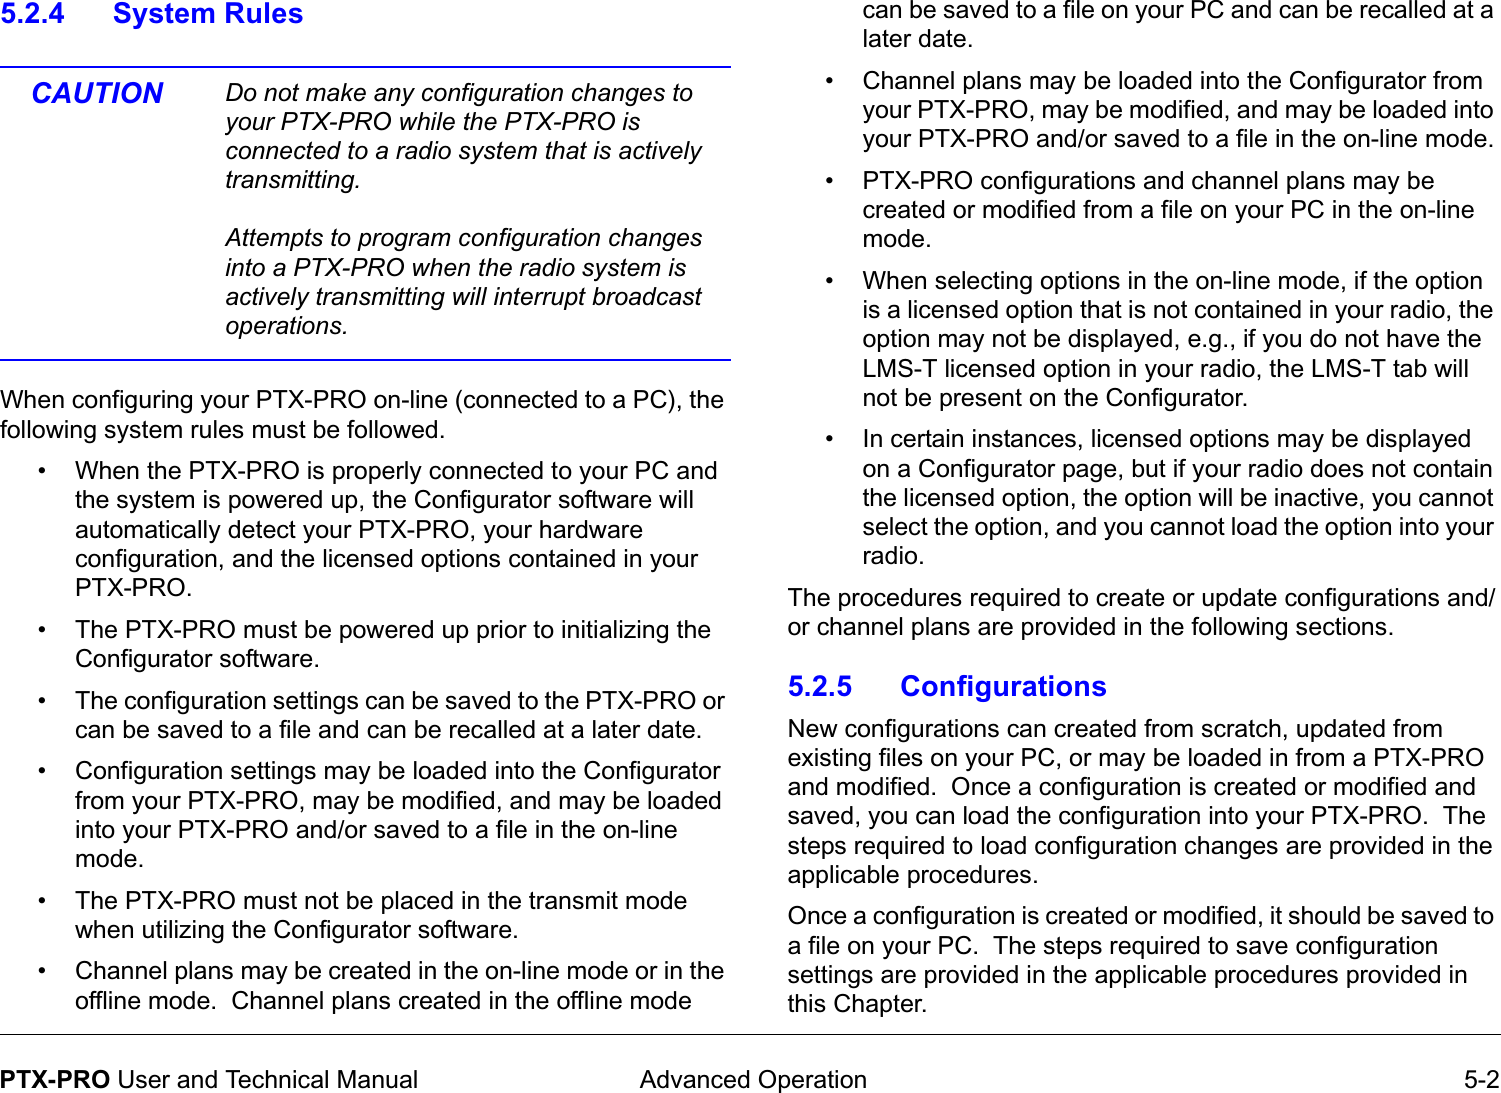  Advanced Operation 5-2PTX-PRO User and Technical Manual5.2.4 System RulesCAUTION Do not make any configuration changes to your PTX-PRO while the PTX-PRO is connected to a radio system that is actively transmitting.Attempts to program configuration changes into a PTX-PRO when the radio system is actively transmitting will interrupt broadcast operations.When configuring your PTX-PRO on-line (connected to a PC), the following system rules must be followed.• When the PTX-PRO is properly connected to your PC and the system is powered up, the Configurator software will automatically detect your PTX-PRO, your hardware configuration, and the licensed options contained in your PTX-PRO.• The PTX-PRO must be powered up prior to initializing the Configurator software.• The configuration settings can be saved to the PTX-PRO or can be saved to a file and can be recalled at a later date.• Configuration settings may be loaded into the Configurator from your PTX-PRO, may be modified, and may be loaded into your PTX-PRO and/or saved to a file in the on-line mode.  • The PTX-PRO must not be placed in the transmit mode when utilizing the Configurator software.• Channel plans may be created in the on-line mode or in the offline mode.  Channel plans created in the offline mode can be saved to a file on your PC and can be recalled at a later date.• Channel plans may be loaded into the Configurator from your PTX-PRO, may be modified, and may be loaded into your PTX-PRO and/or saved to a file in the on-line mode.• PTX-PRO configurations and channel plans may be created or modified from a file on your PC in the on-line mode.  • When selecting options in the on-line mode, if the option is a licensed option that is not contained in your radio, the option may not be displayed, e.g., if you do not have the LMS-T licensed option in your radio, the LMS-T tab will not be present on the Configurator.• In certain instances, licensed options may be displayed on a Configurator page, but if your radio does not contain the licensed option, the option will be inactive, you cannot select the option, and you cannot load the option into your radio. The procedures required to create or update configurations and/or channel plans are provided in the following sections.5.2.5 ConfigurationsNew configurations can created from scratch, updated from existing files on your PC, or may be loaded in from a PTX-PRO and modified.  Once a configuration is created or modified and saved, you can load the configuration into your PTX-PRO.  The steps required to load configuration changes are provided in the applicable procedures.Once a configuration is created or modified, it should be saved to a file on your PC.  The steps required to save configuration settings are provided in the applicable procedures provided in this Chapter.